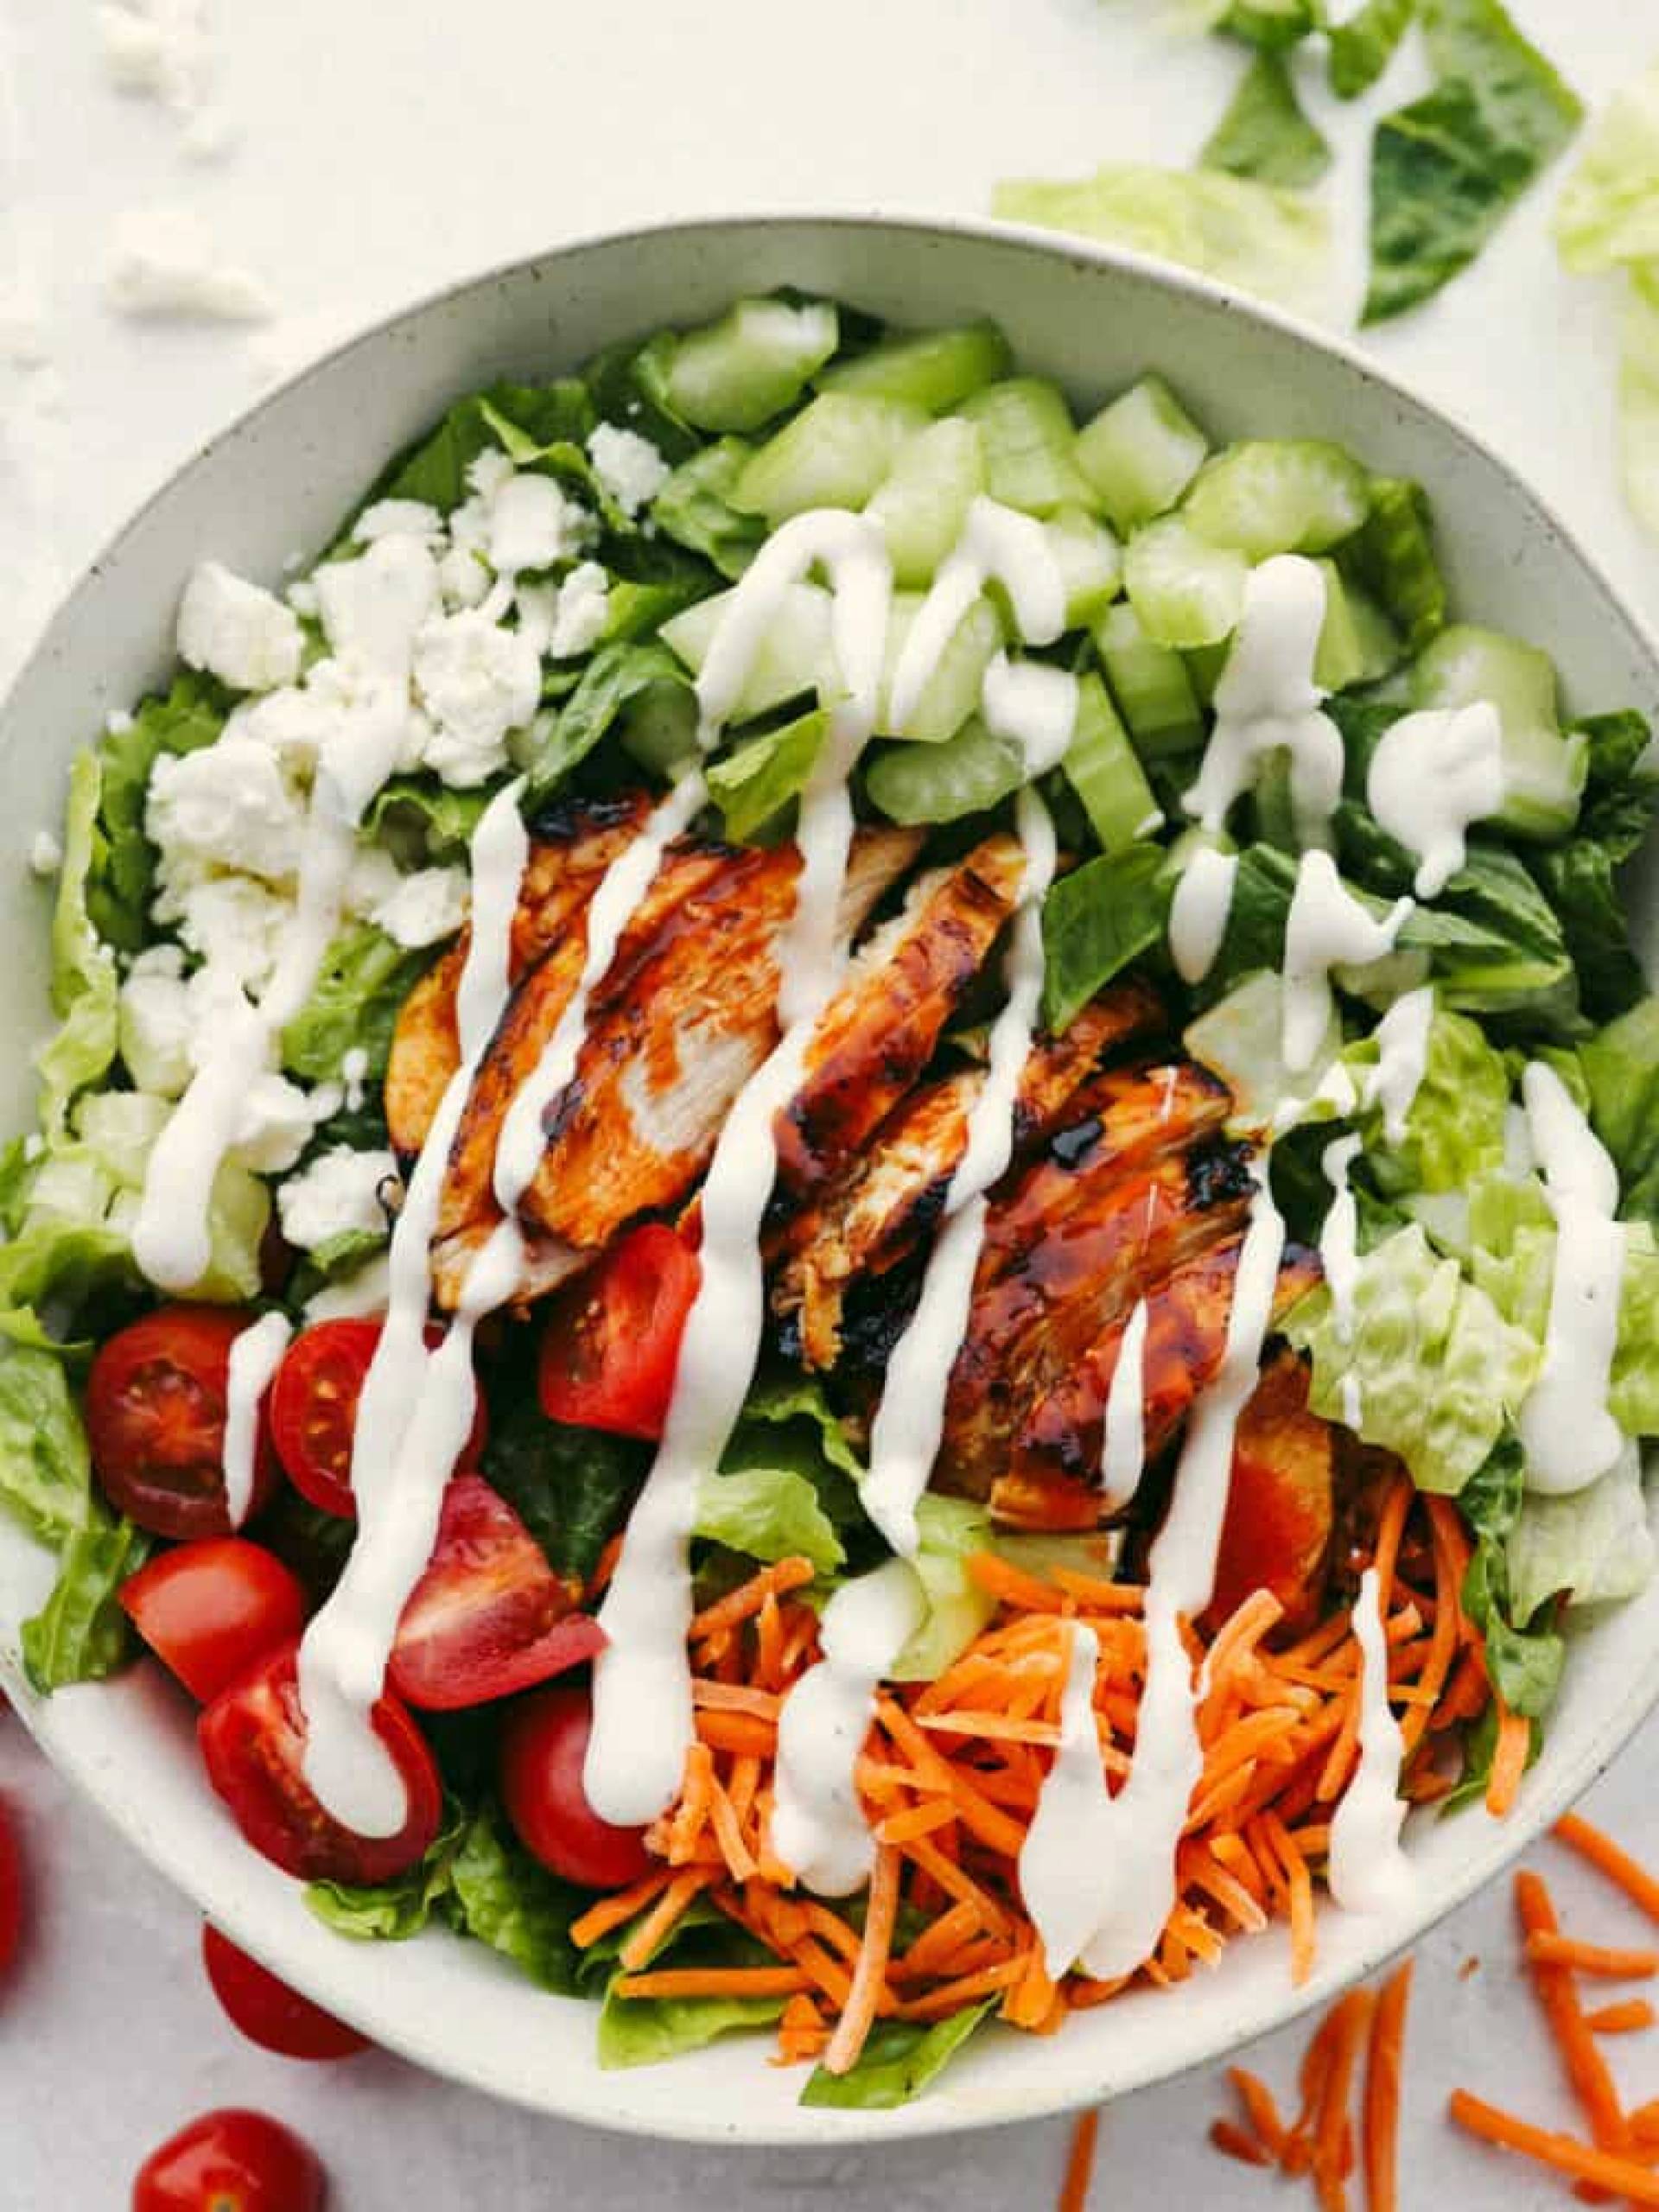 KETO-Grill Chicken Salad w/Mixed Greens, Tomato, Almonds, Green Onions, Blue Cheese, Spiced Walnuts & Ranch Vinaigrette.